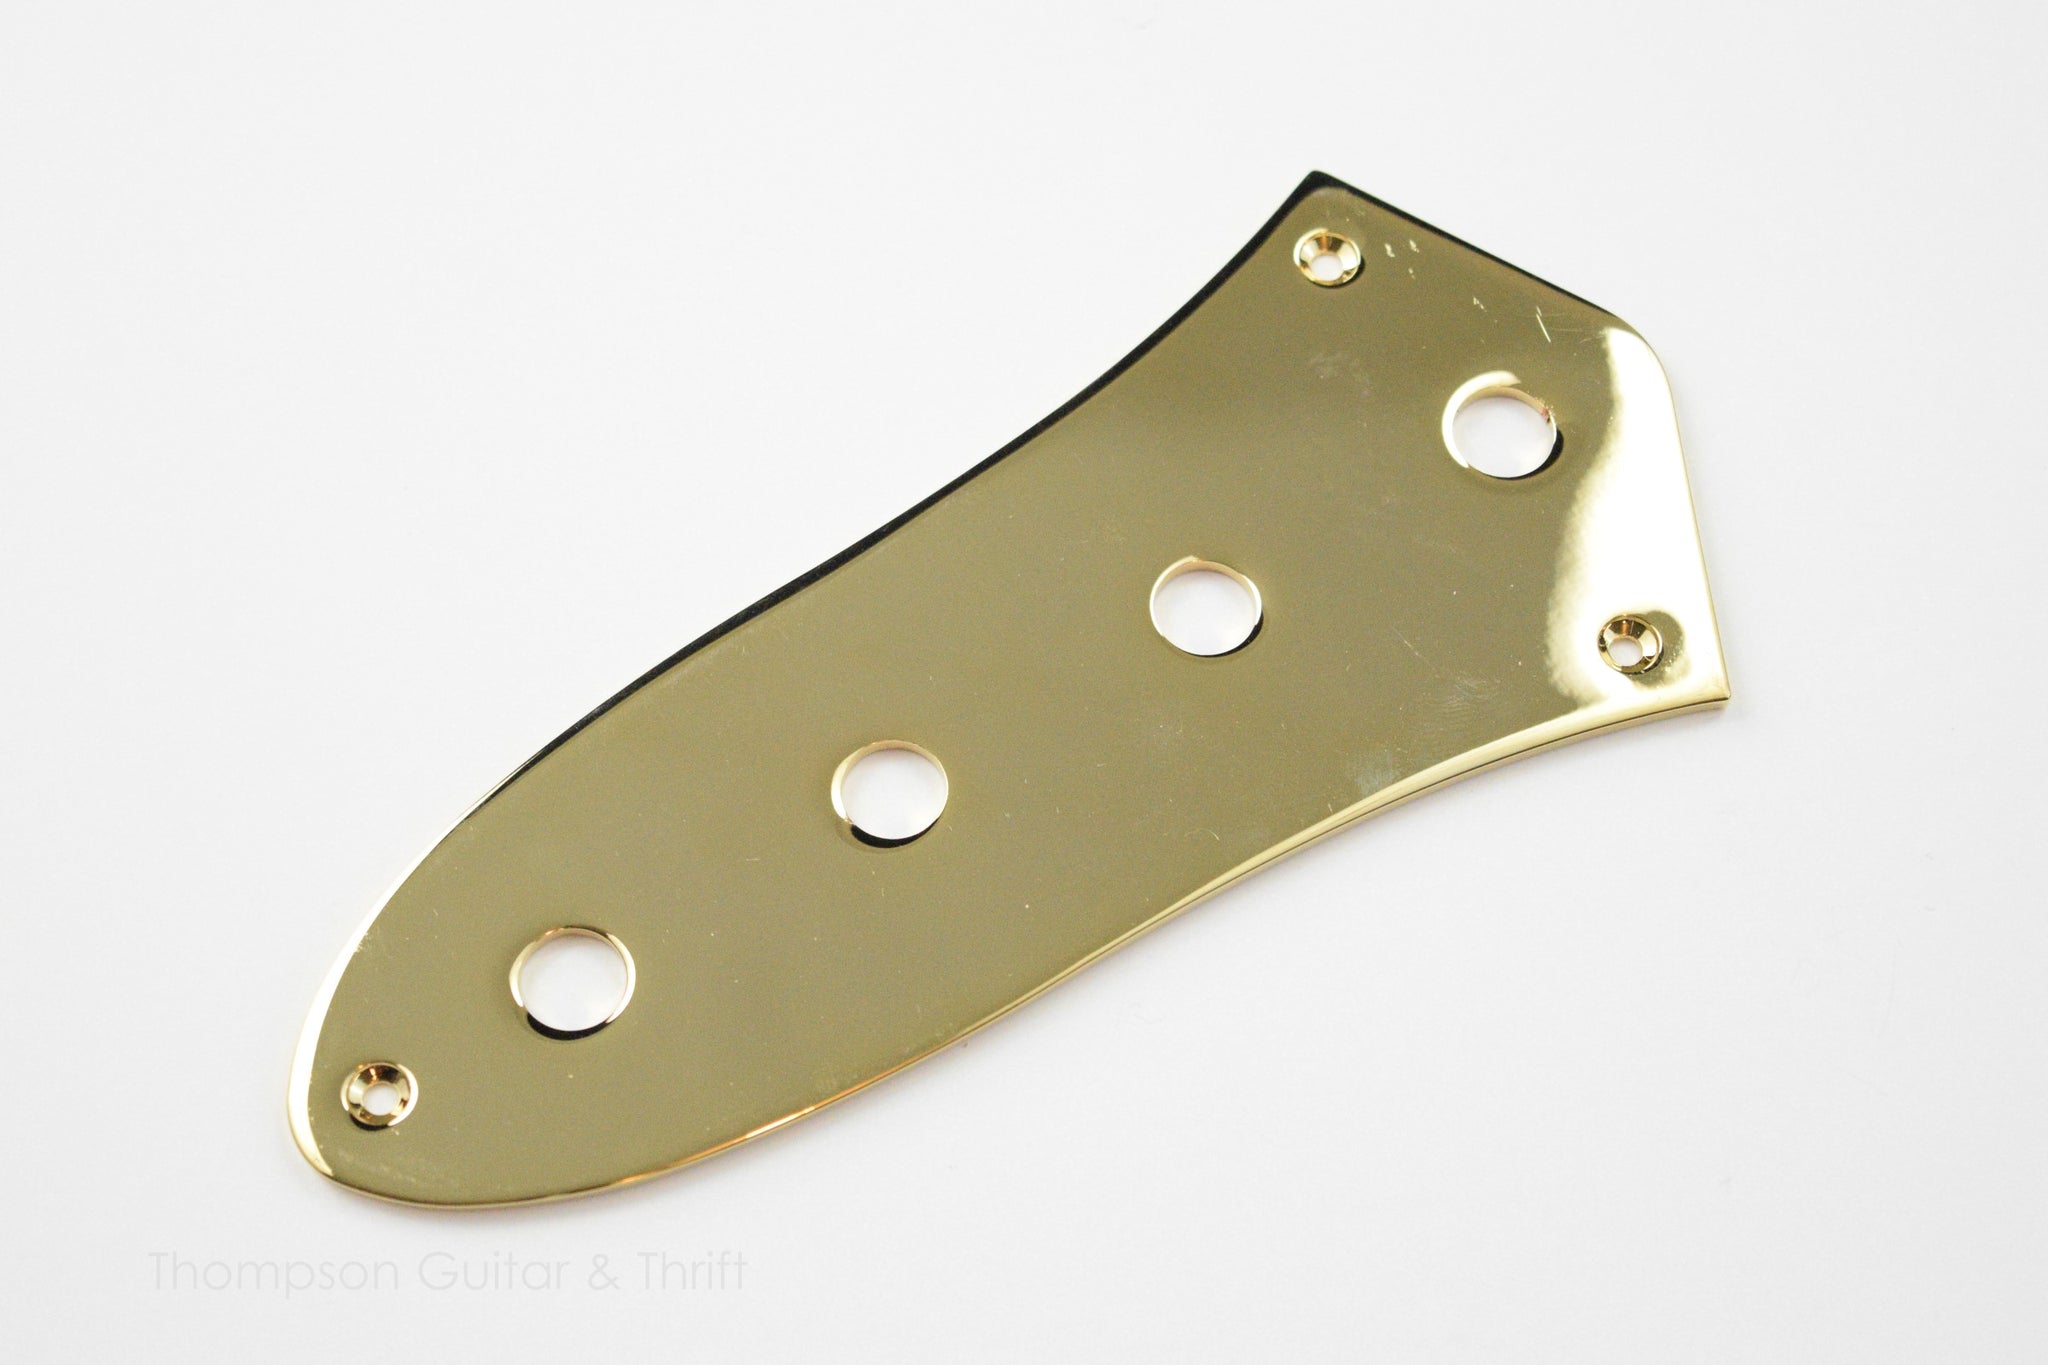 Gold USA Spec Control Plate fits Jazz Bass (Blemished)